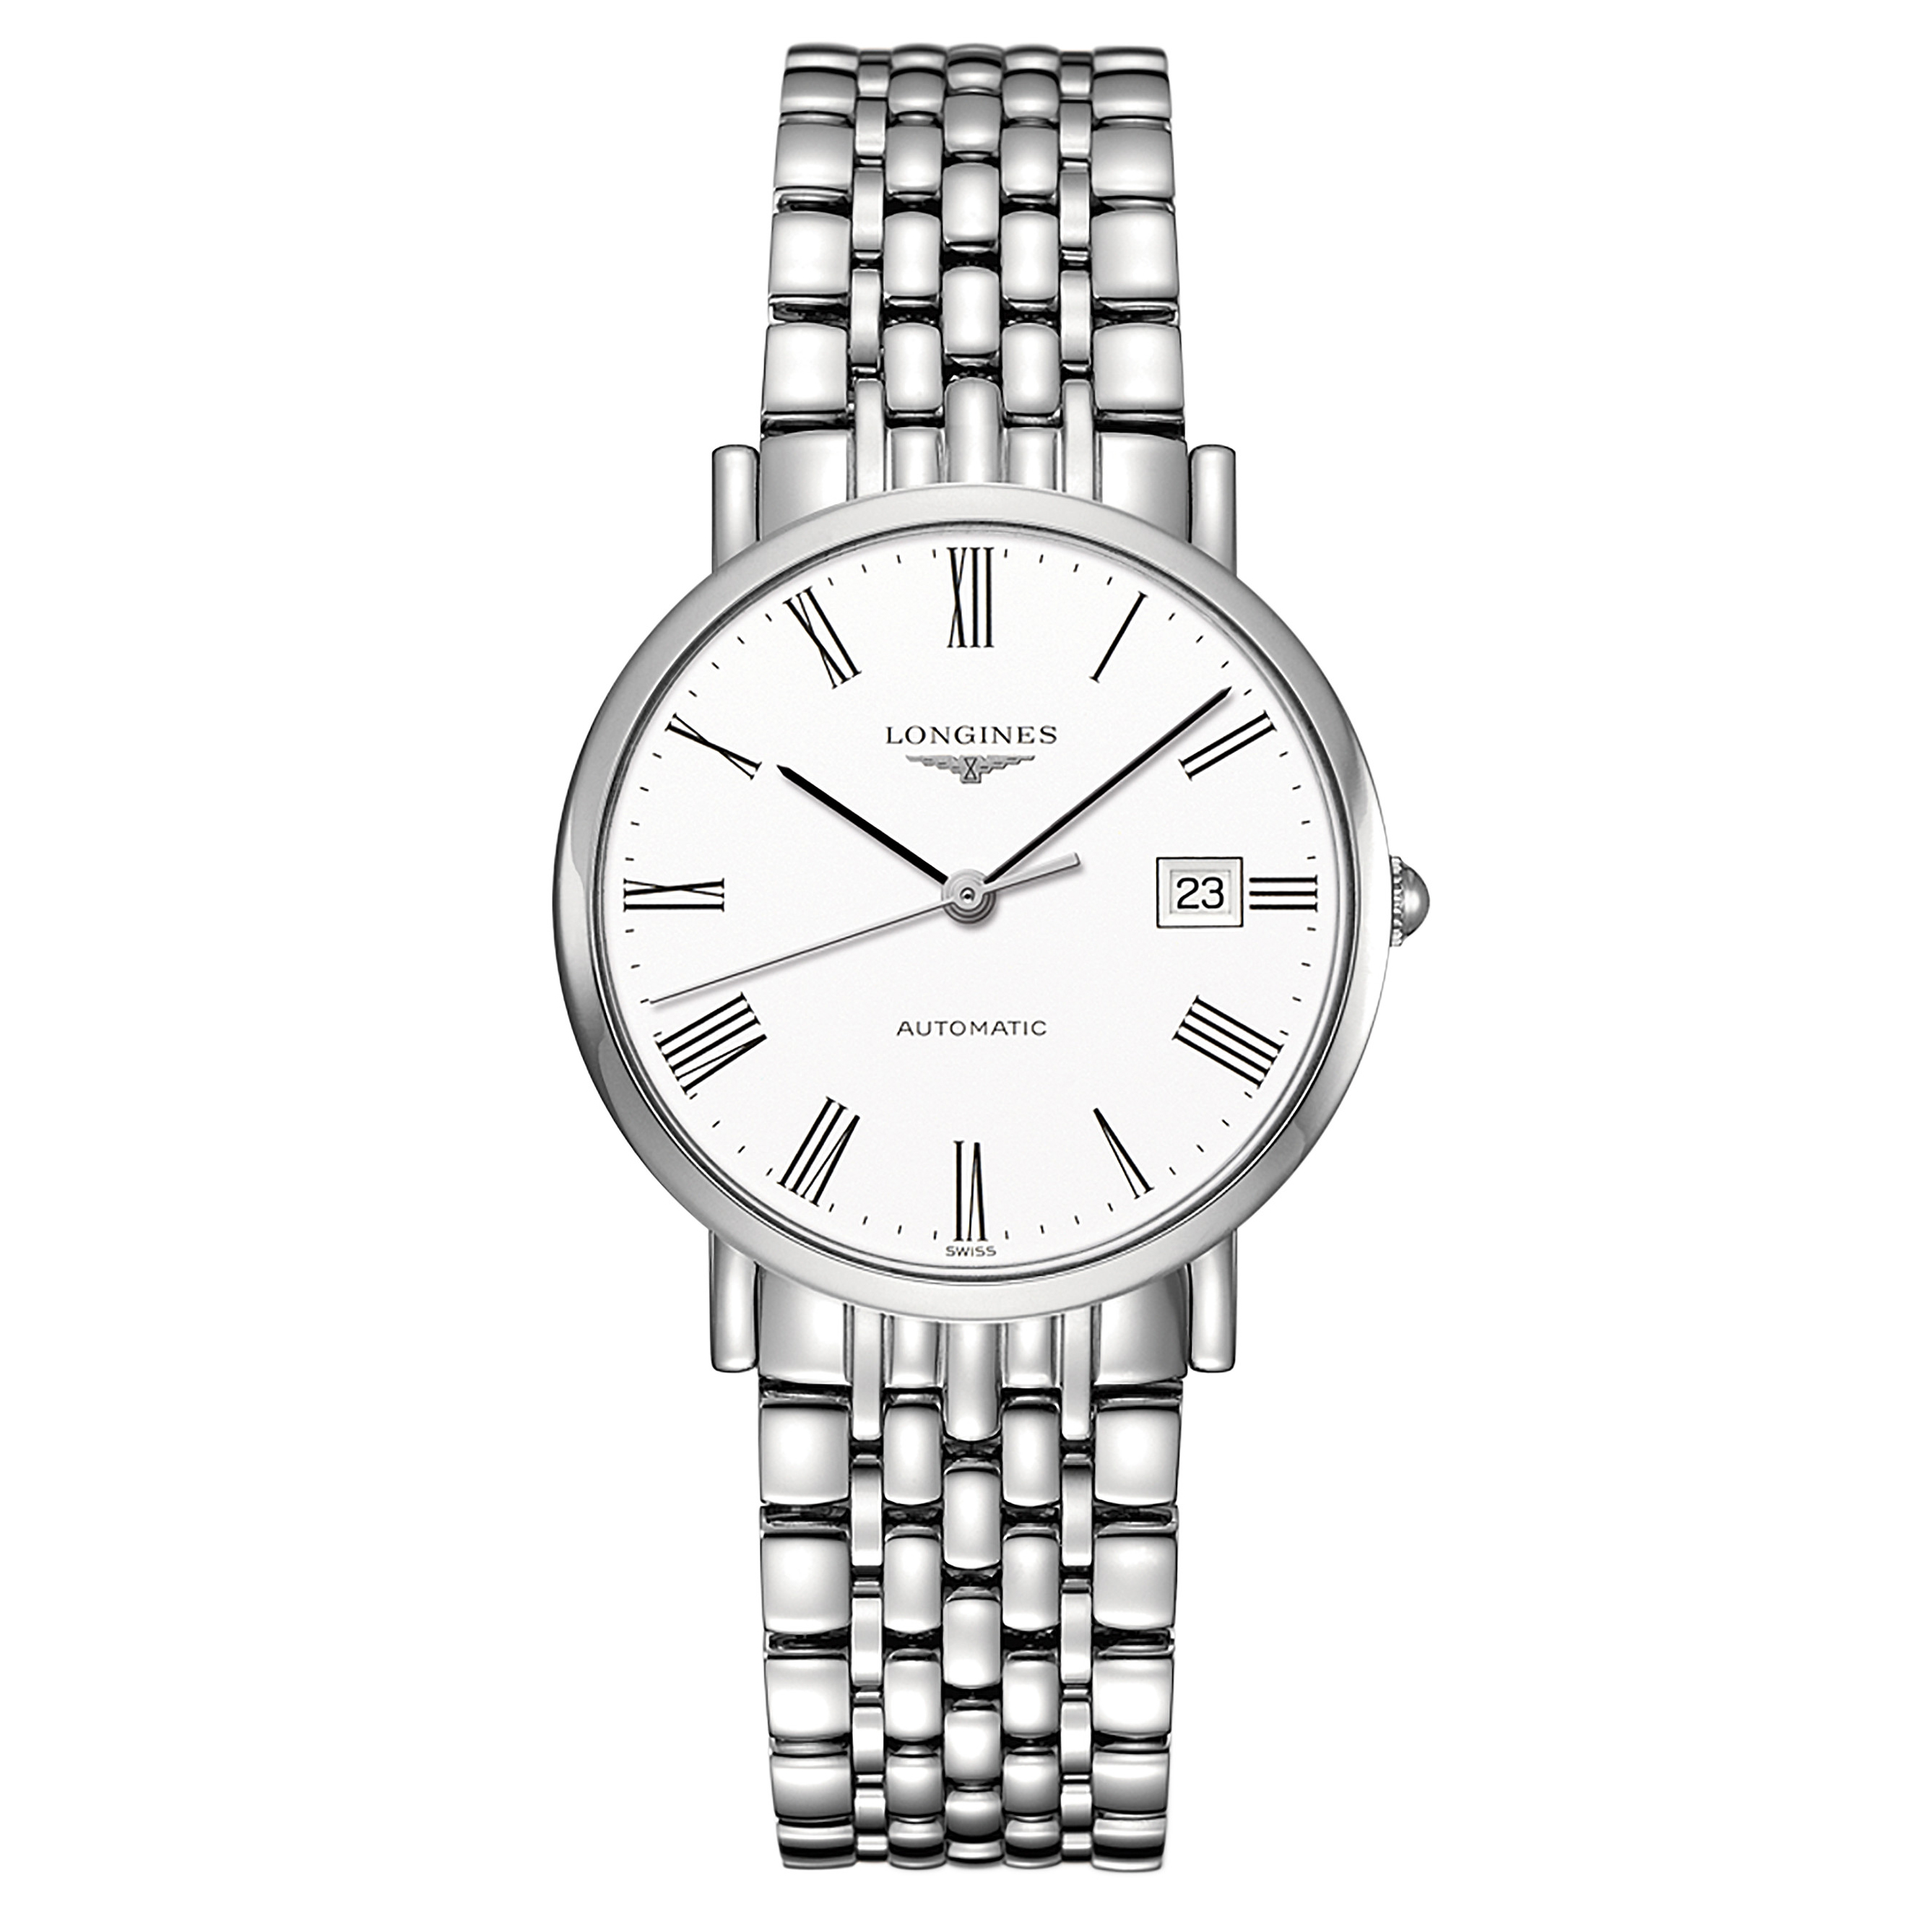 Longines - Elegant White Dial Stainless Steel Watch 37mm | Peter's of ...